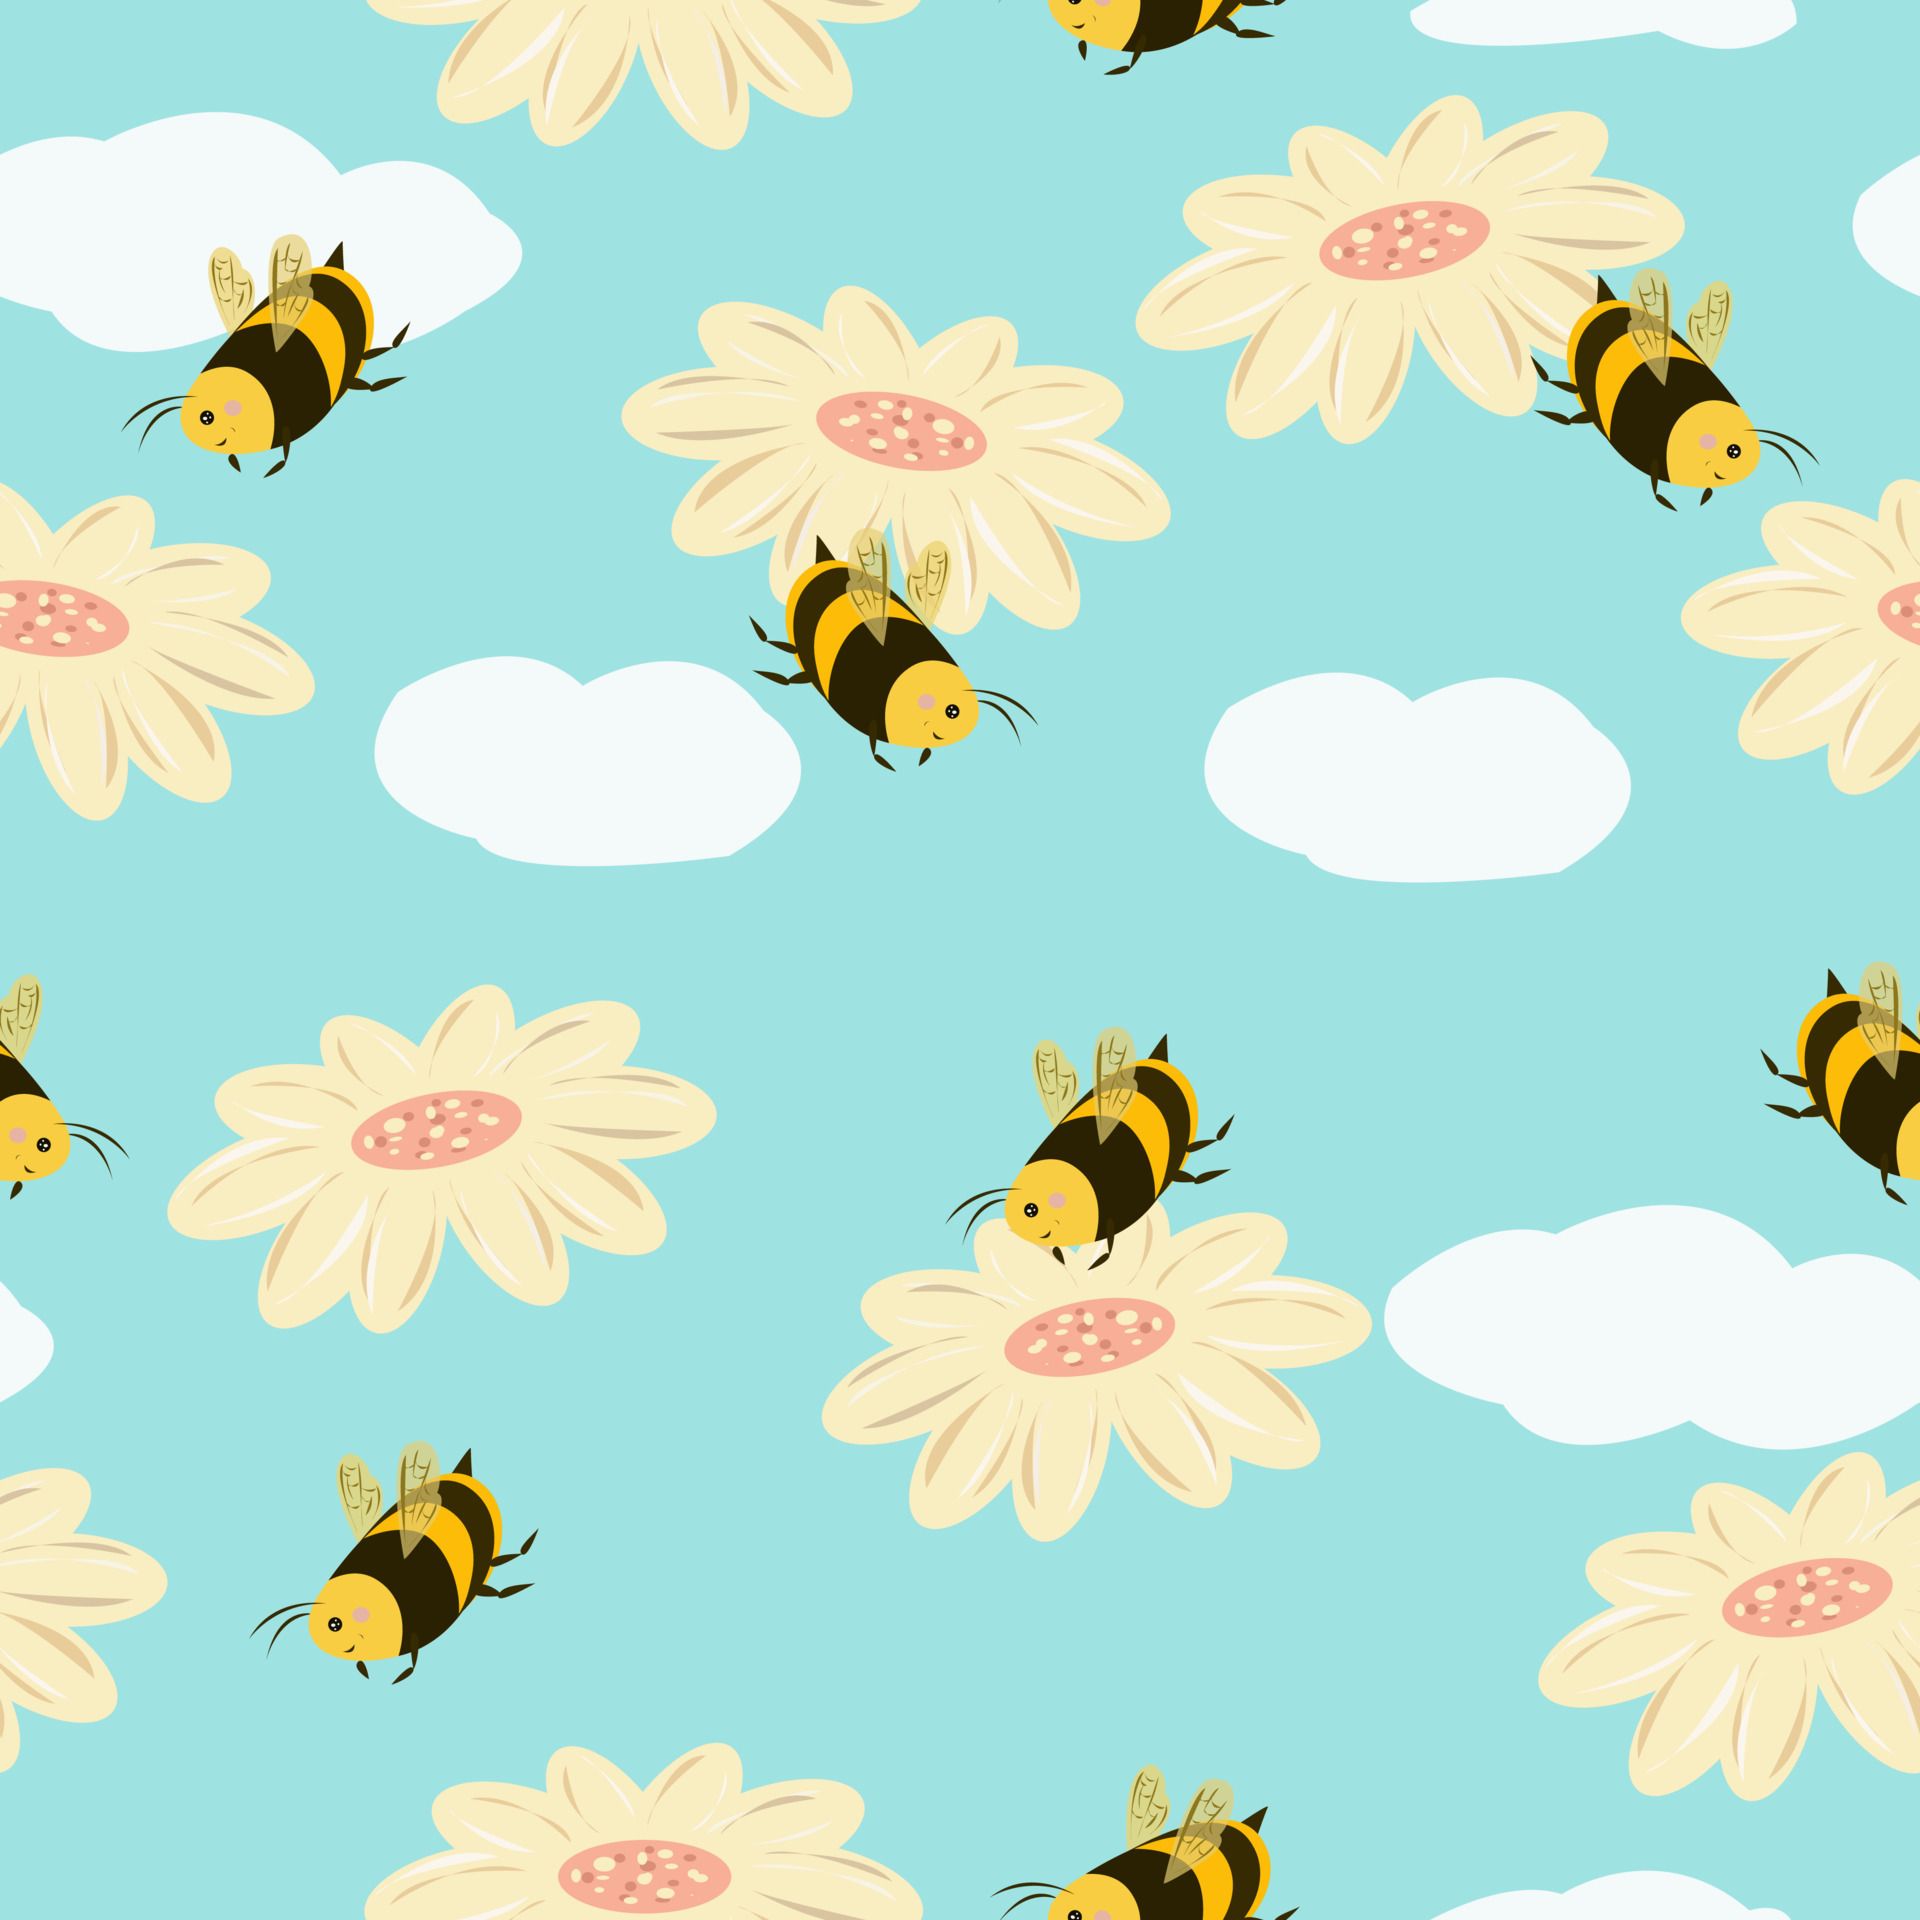 A pattern of bees and flowers on a blue background - Bee